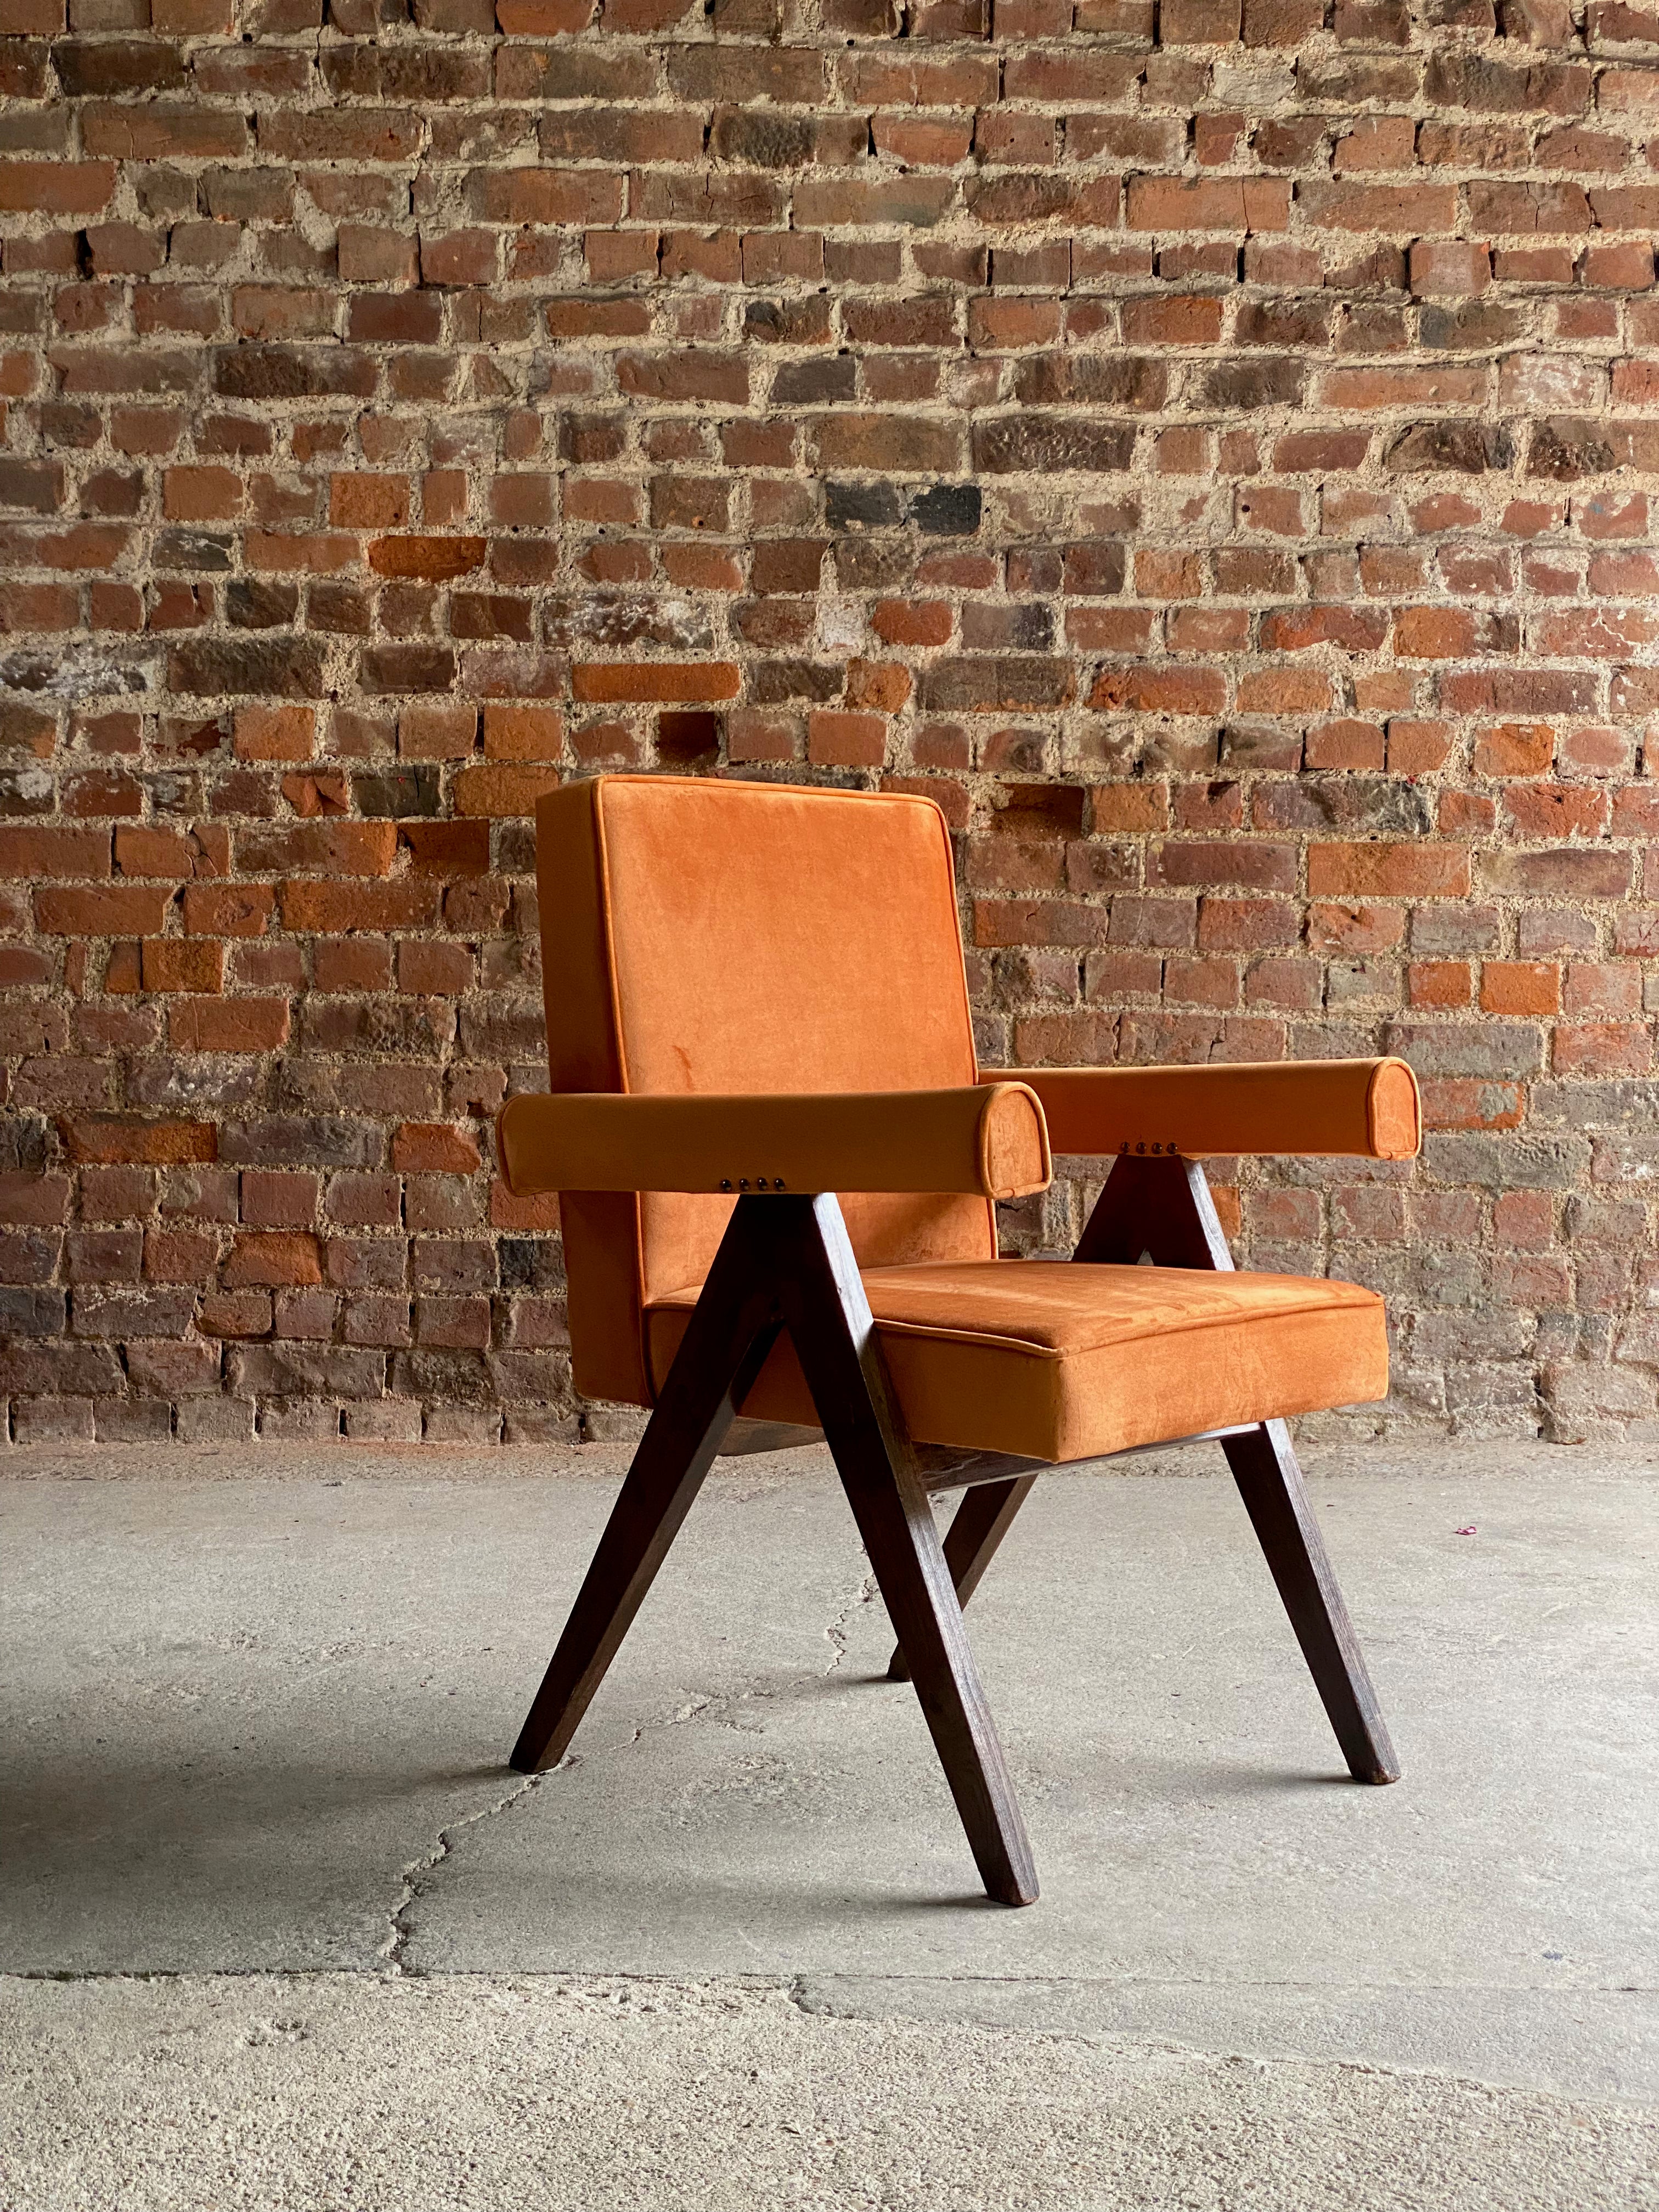 Indian Pierre Jeanneret Committee Chair Orange Certificate by Jacques Dworczak 1953  For Sale